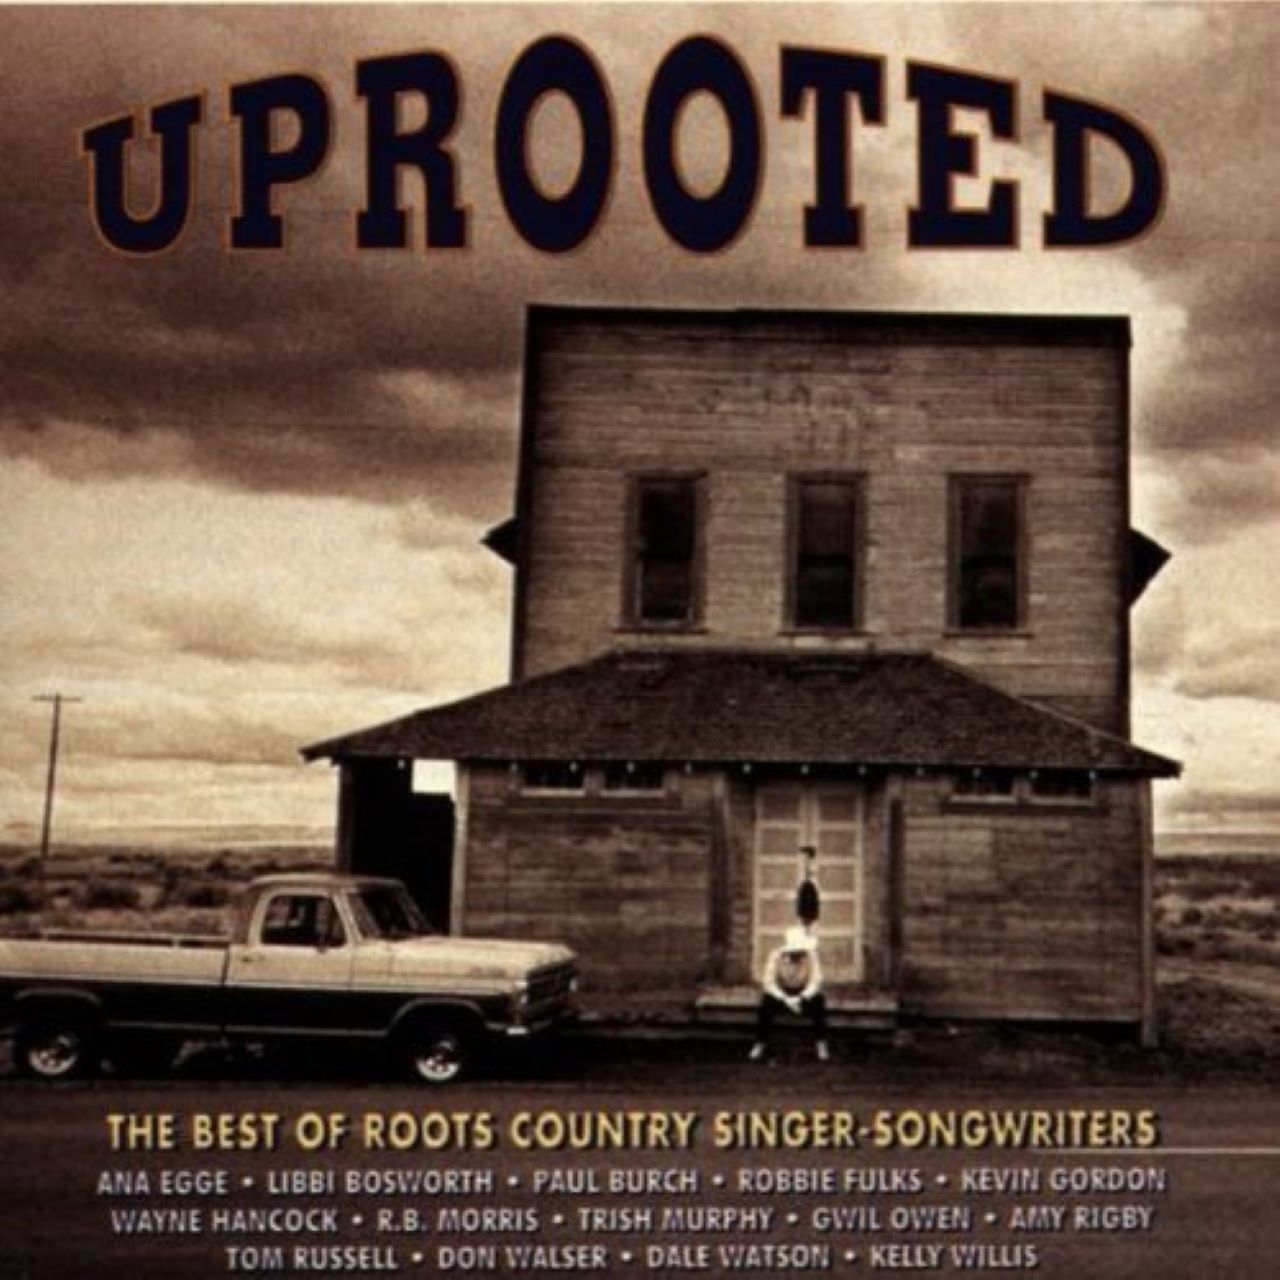 A.A.V.V. - Uprooted - The Best Of Roots Country Singer Songwrìters cover album